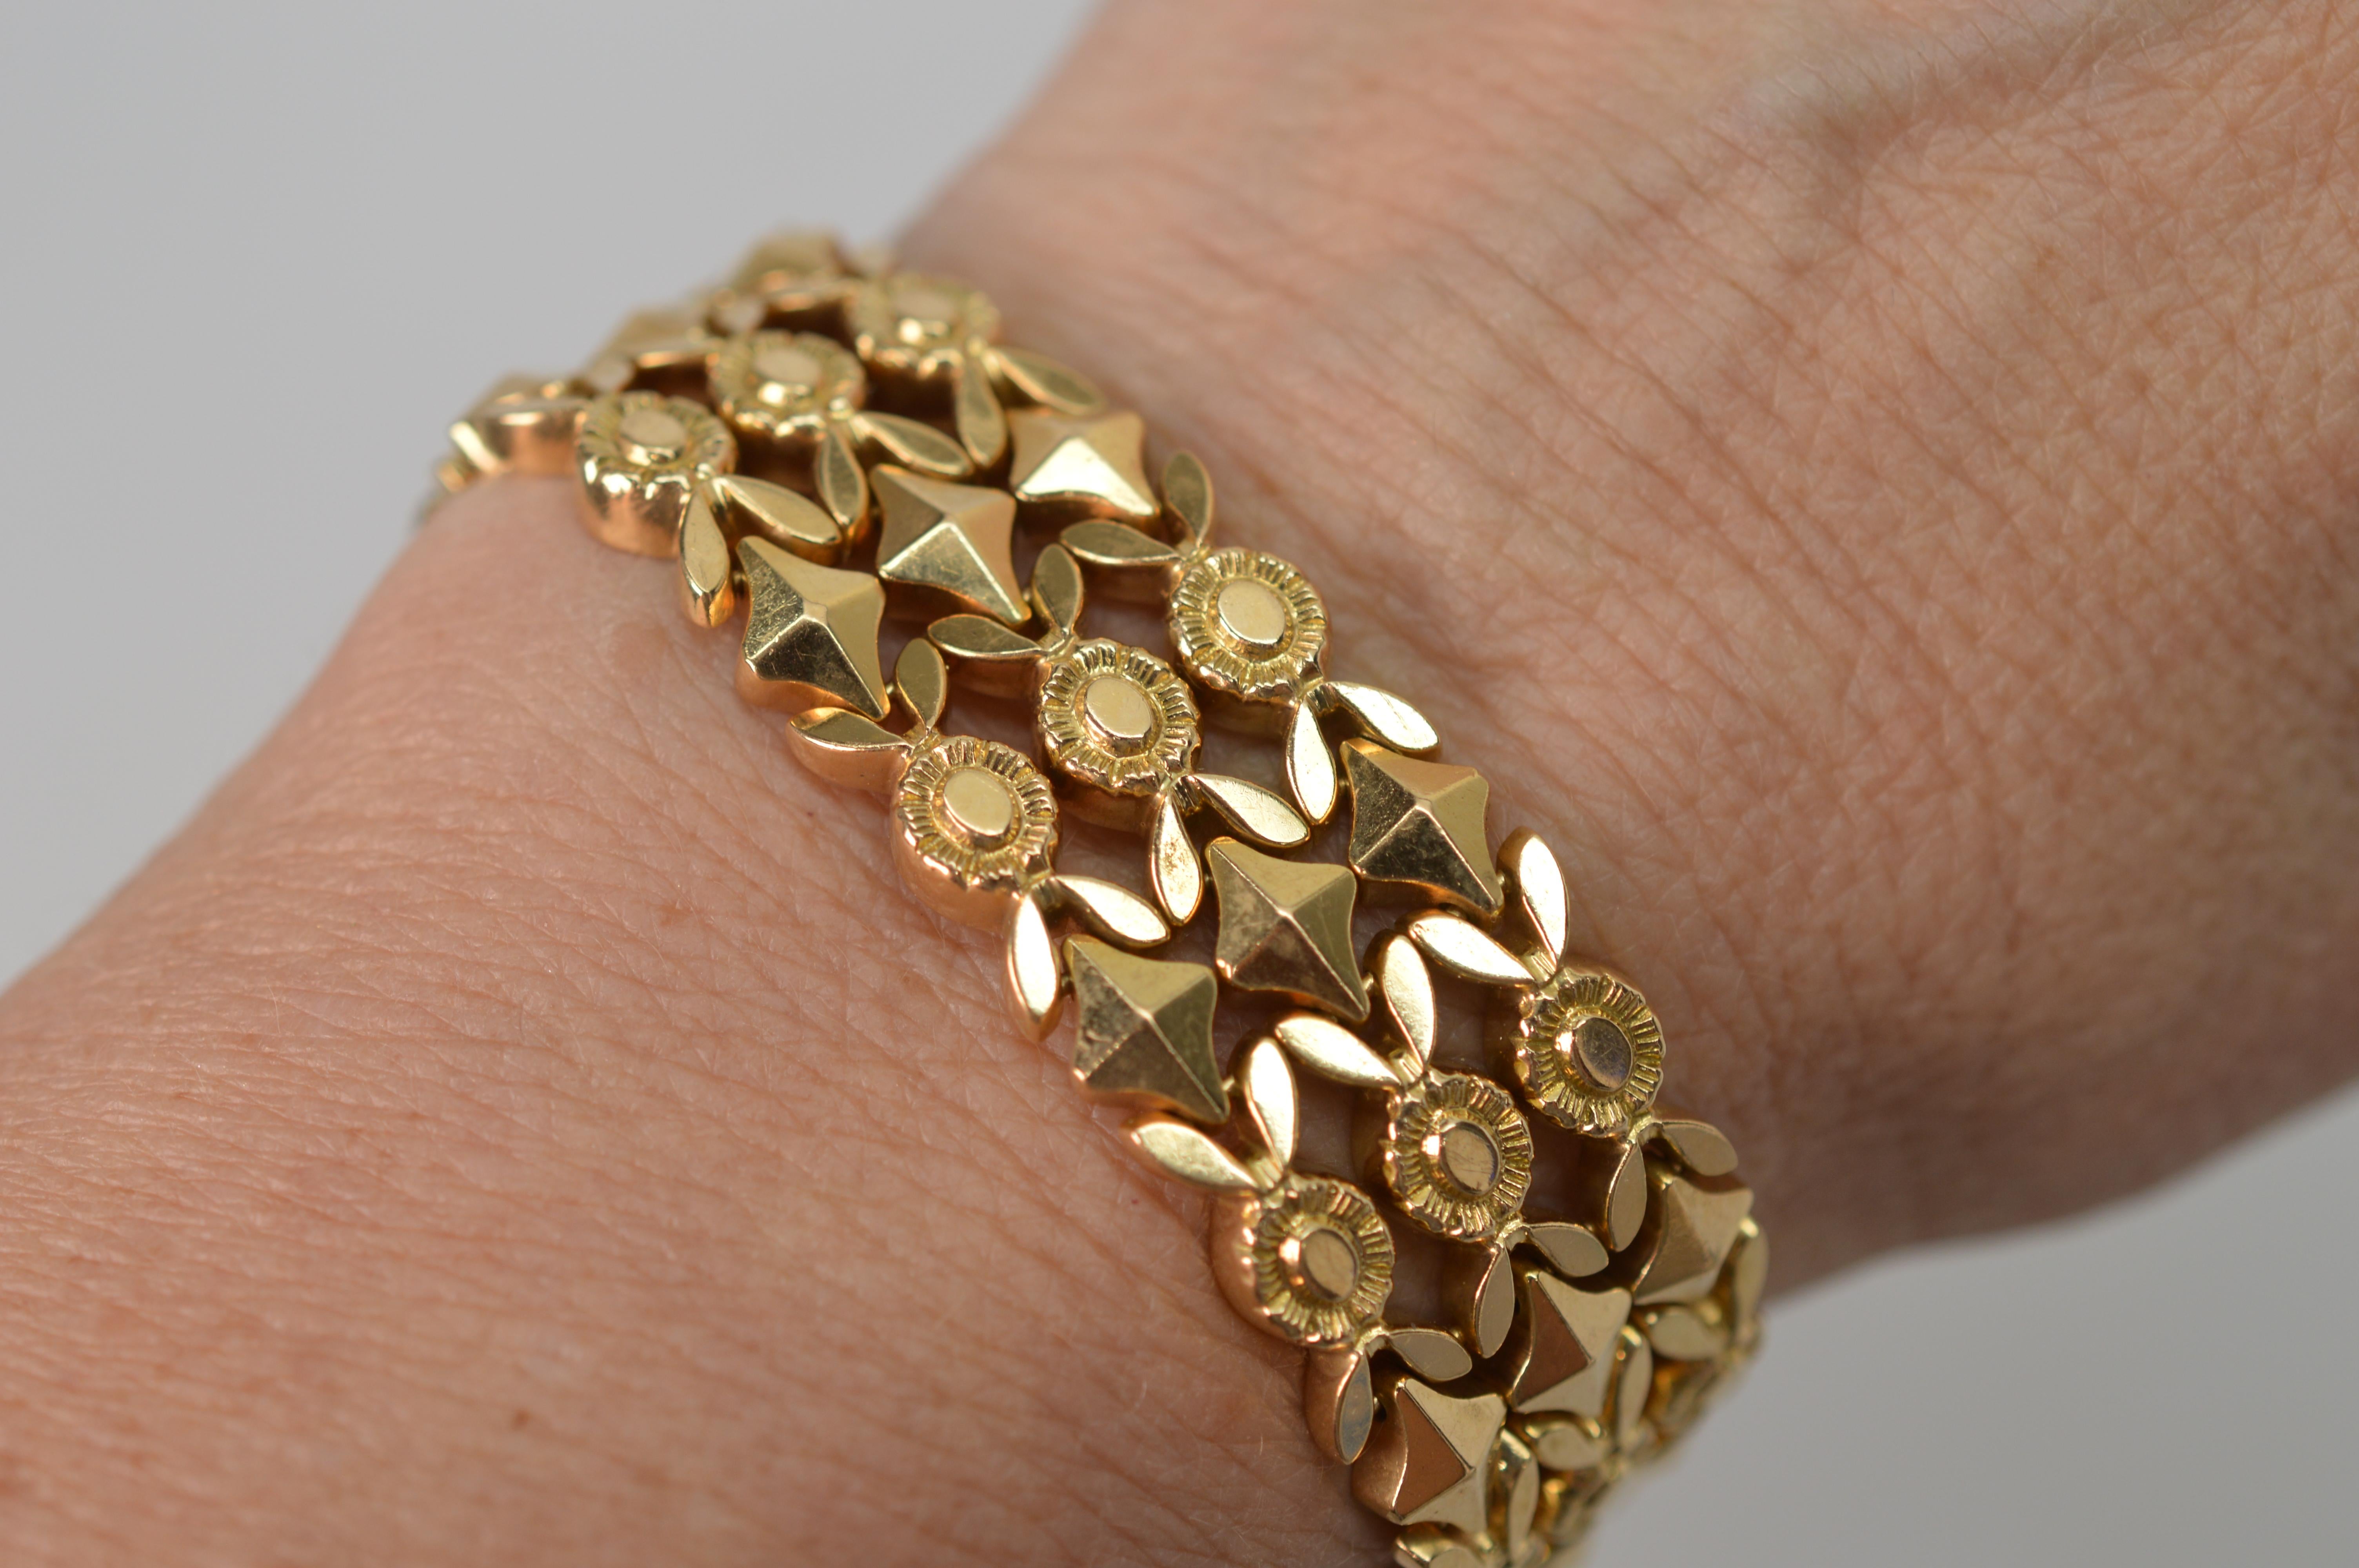 Timeless 1940's three row pyramid stud floral medallion link eighteen karat (18K) yellow gold bracelet . Flexible and well constructed, this classic piece measures 7-3/4 inch in length by 3/4 inch wide and is outfitted with box clasp and safety